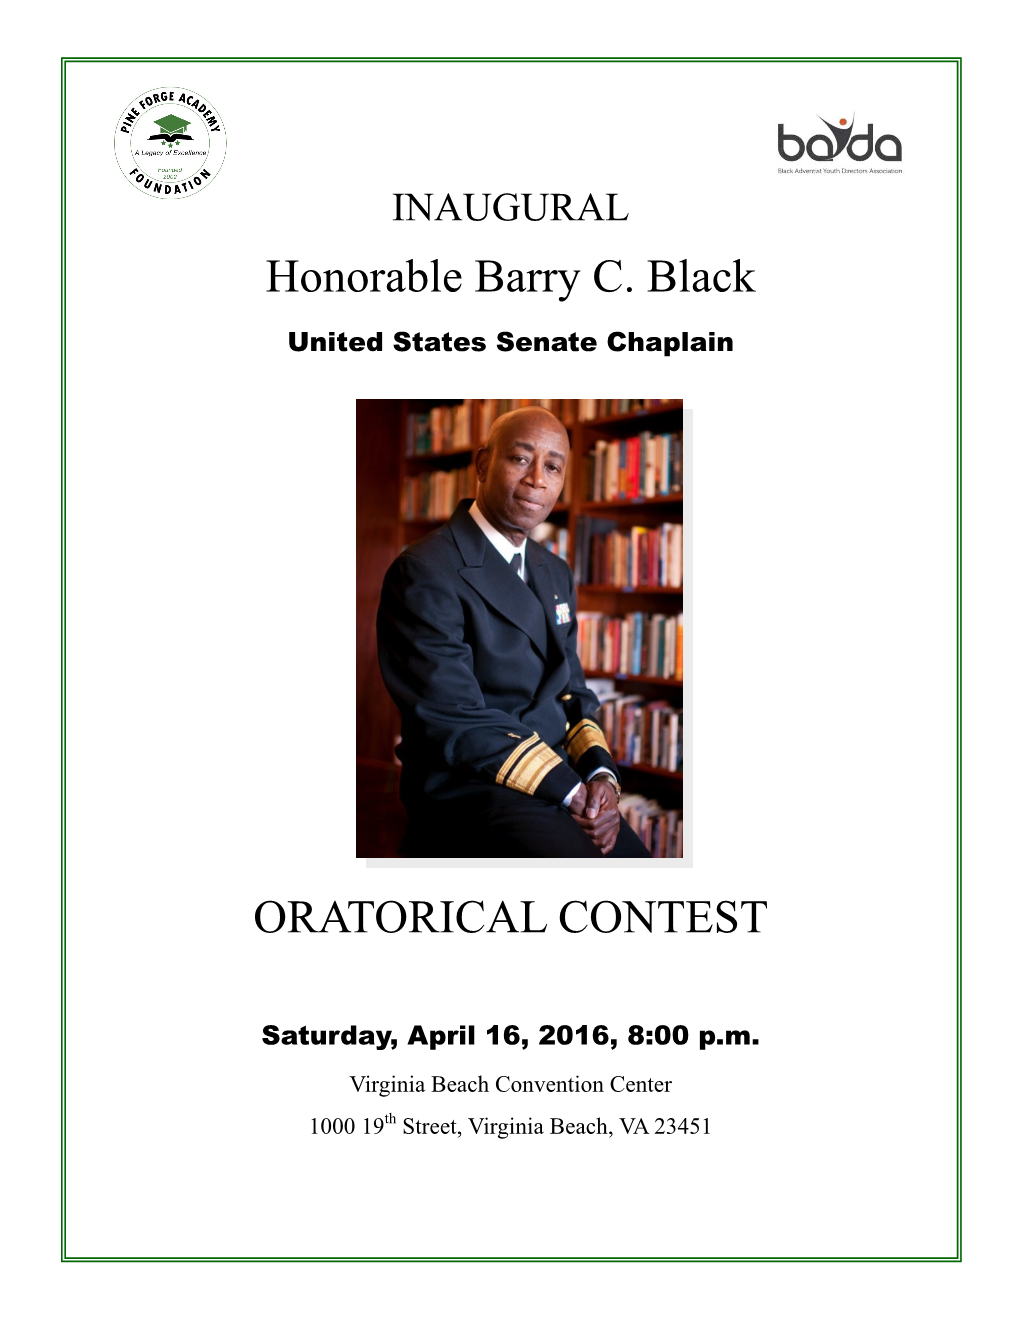 Honorable Barry C. Black ORATORICAL CONTEST